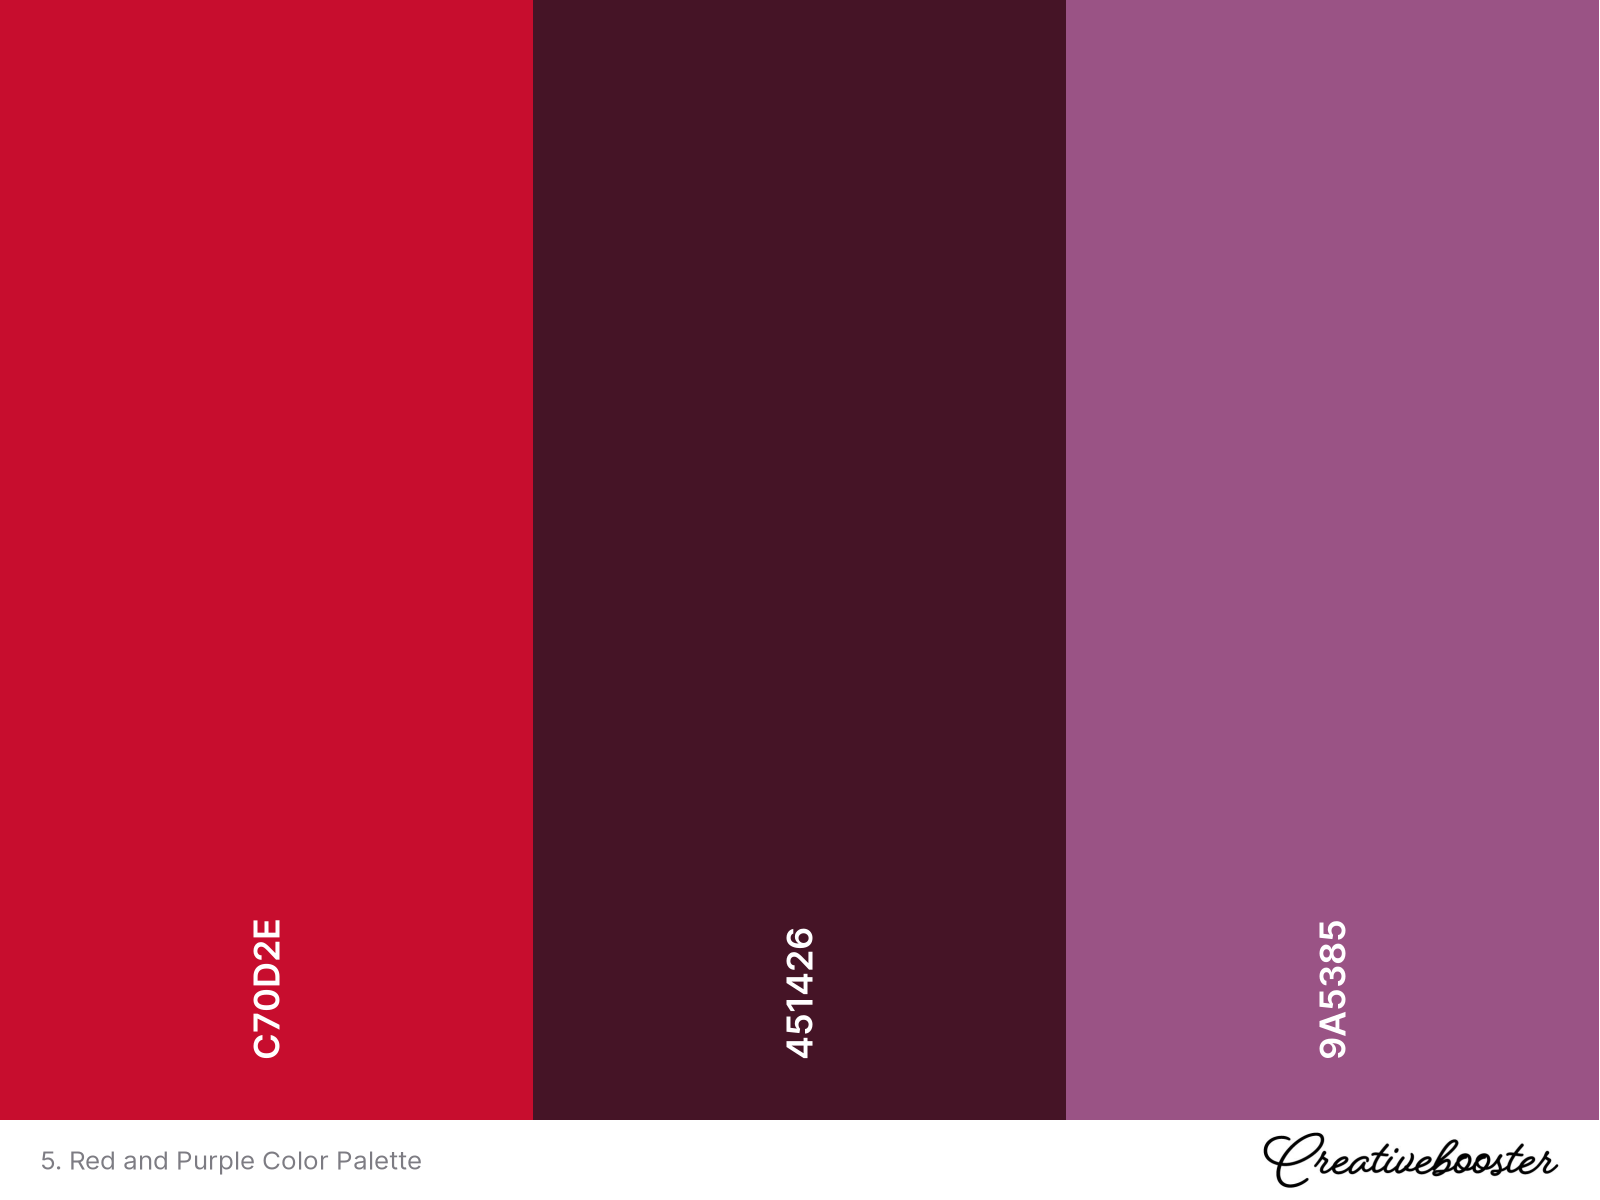 5. Red and Purple Color Palette